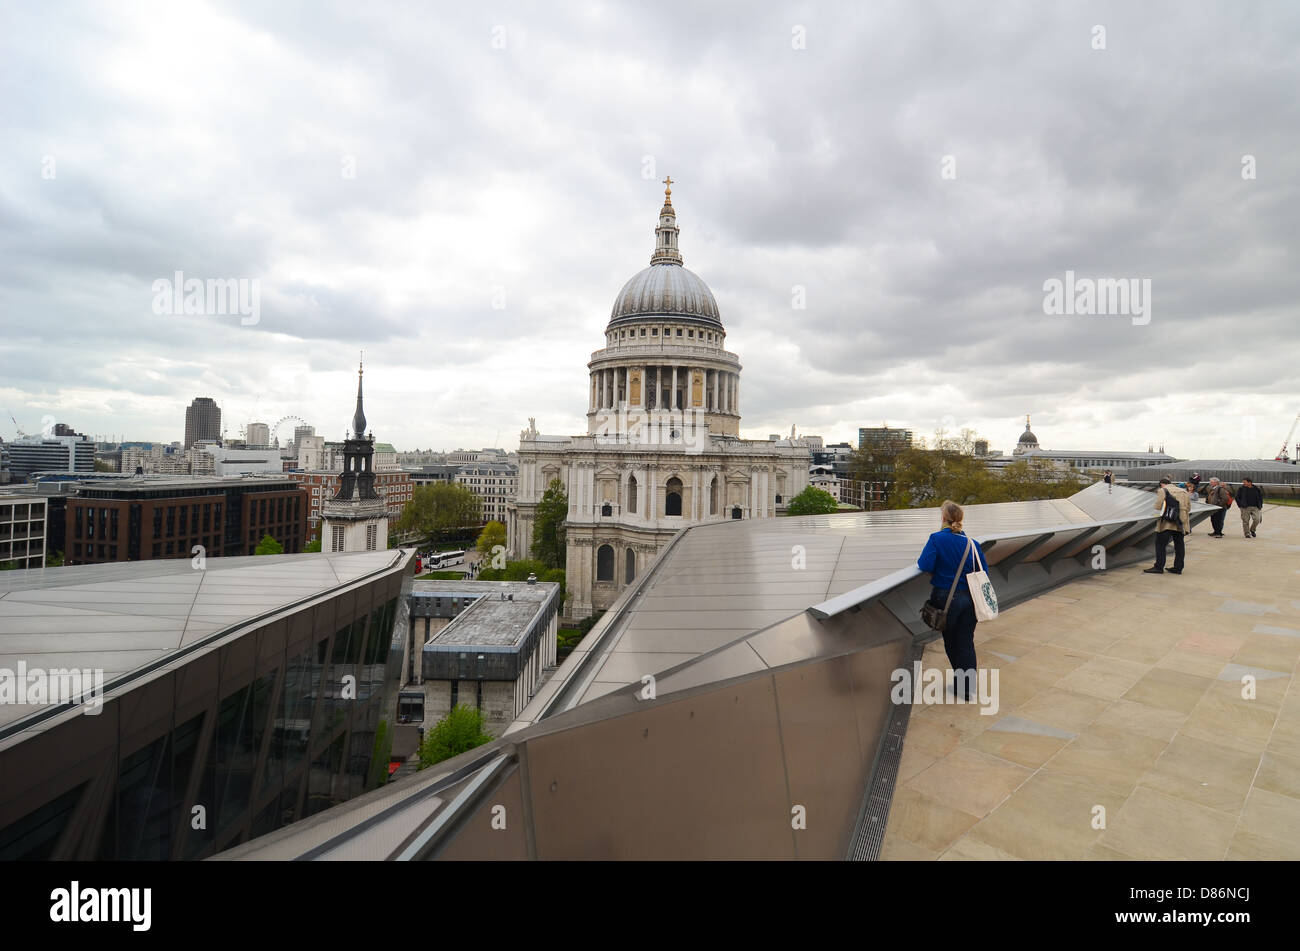 St. Paul's Cathedral seen from the top of One New Change in London, UK. Stock Photo